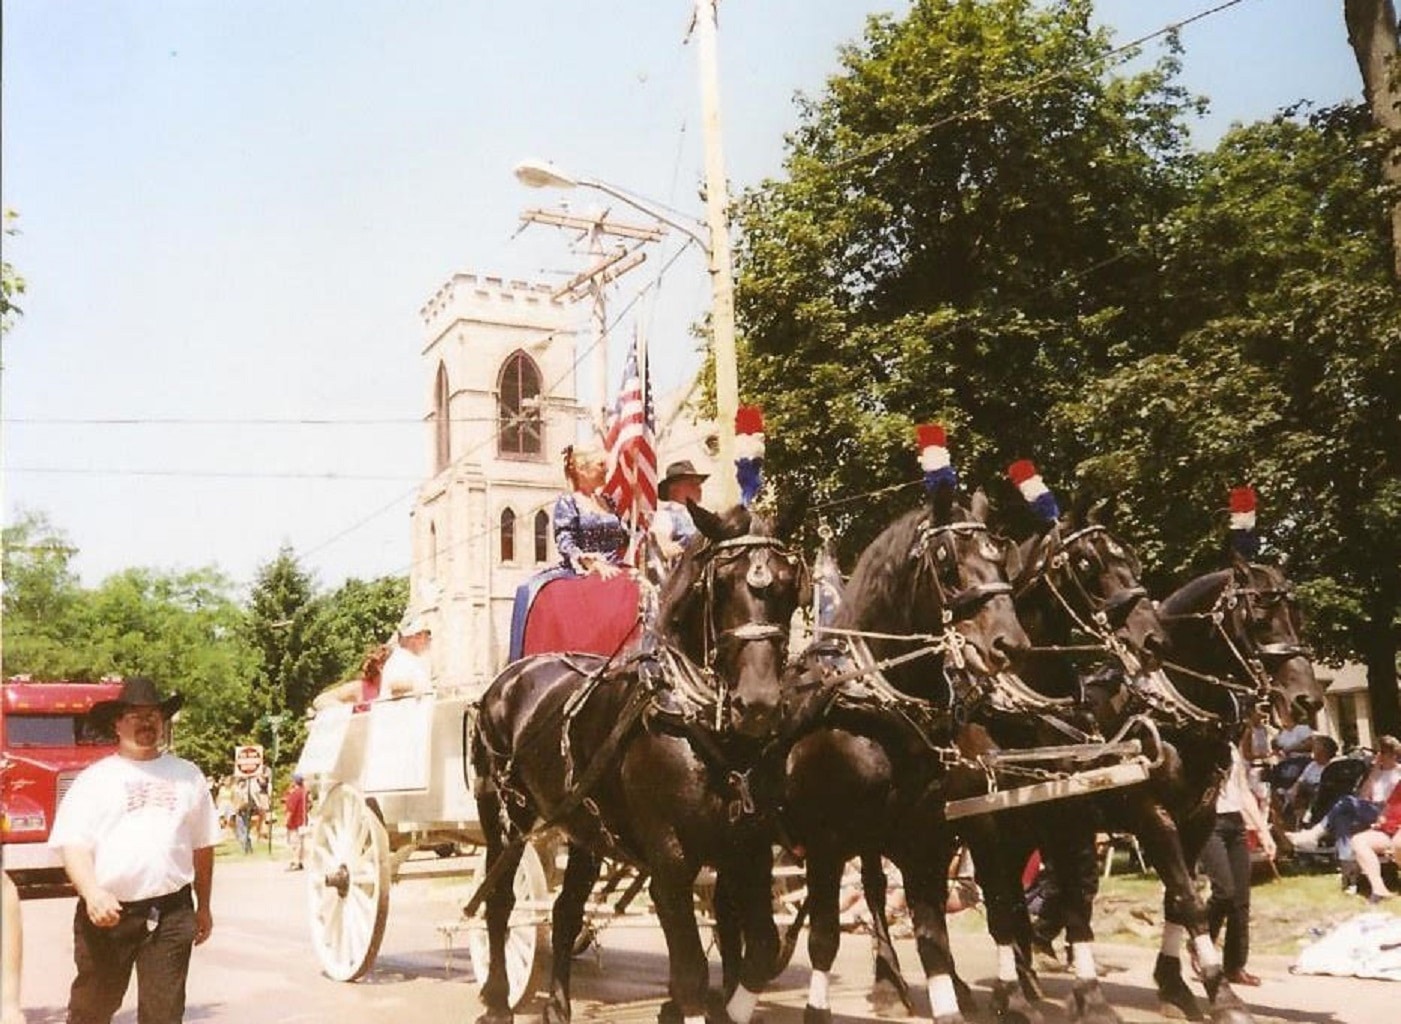 FlashbackFriday with the Historical Society 2002 Fourth of July